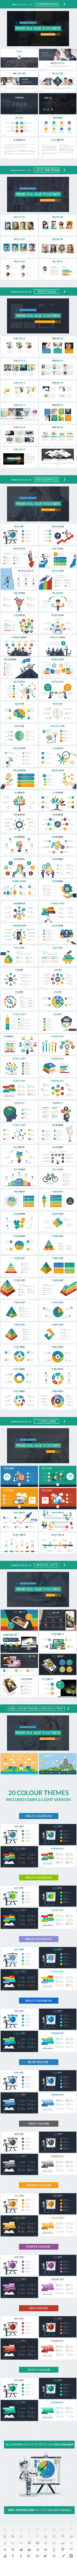 Minalo - Business Powerpoint Template - 1